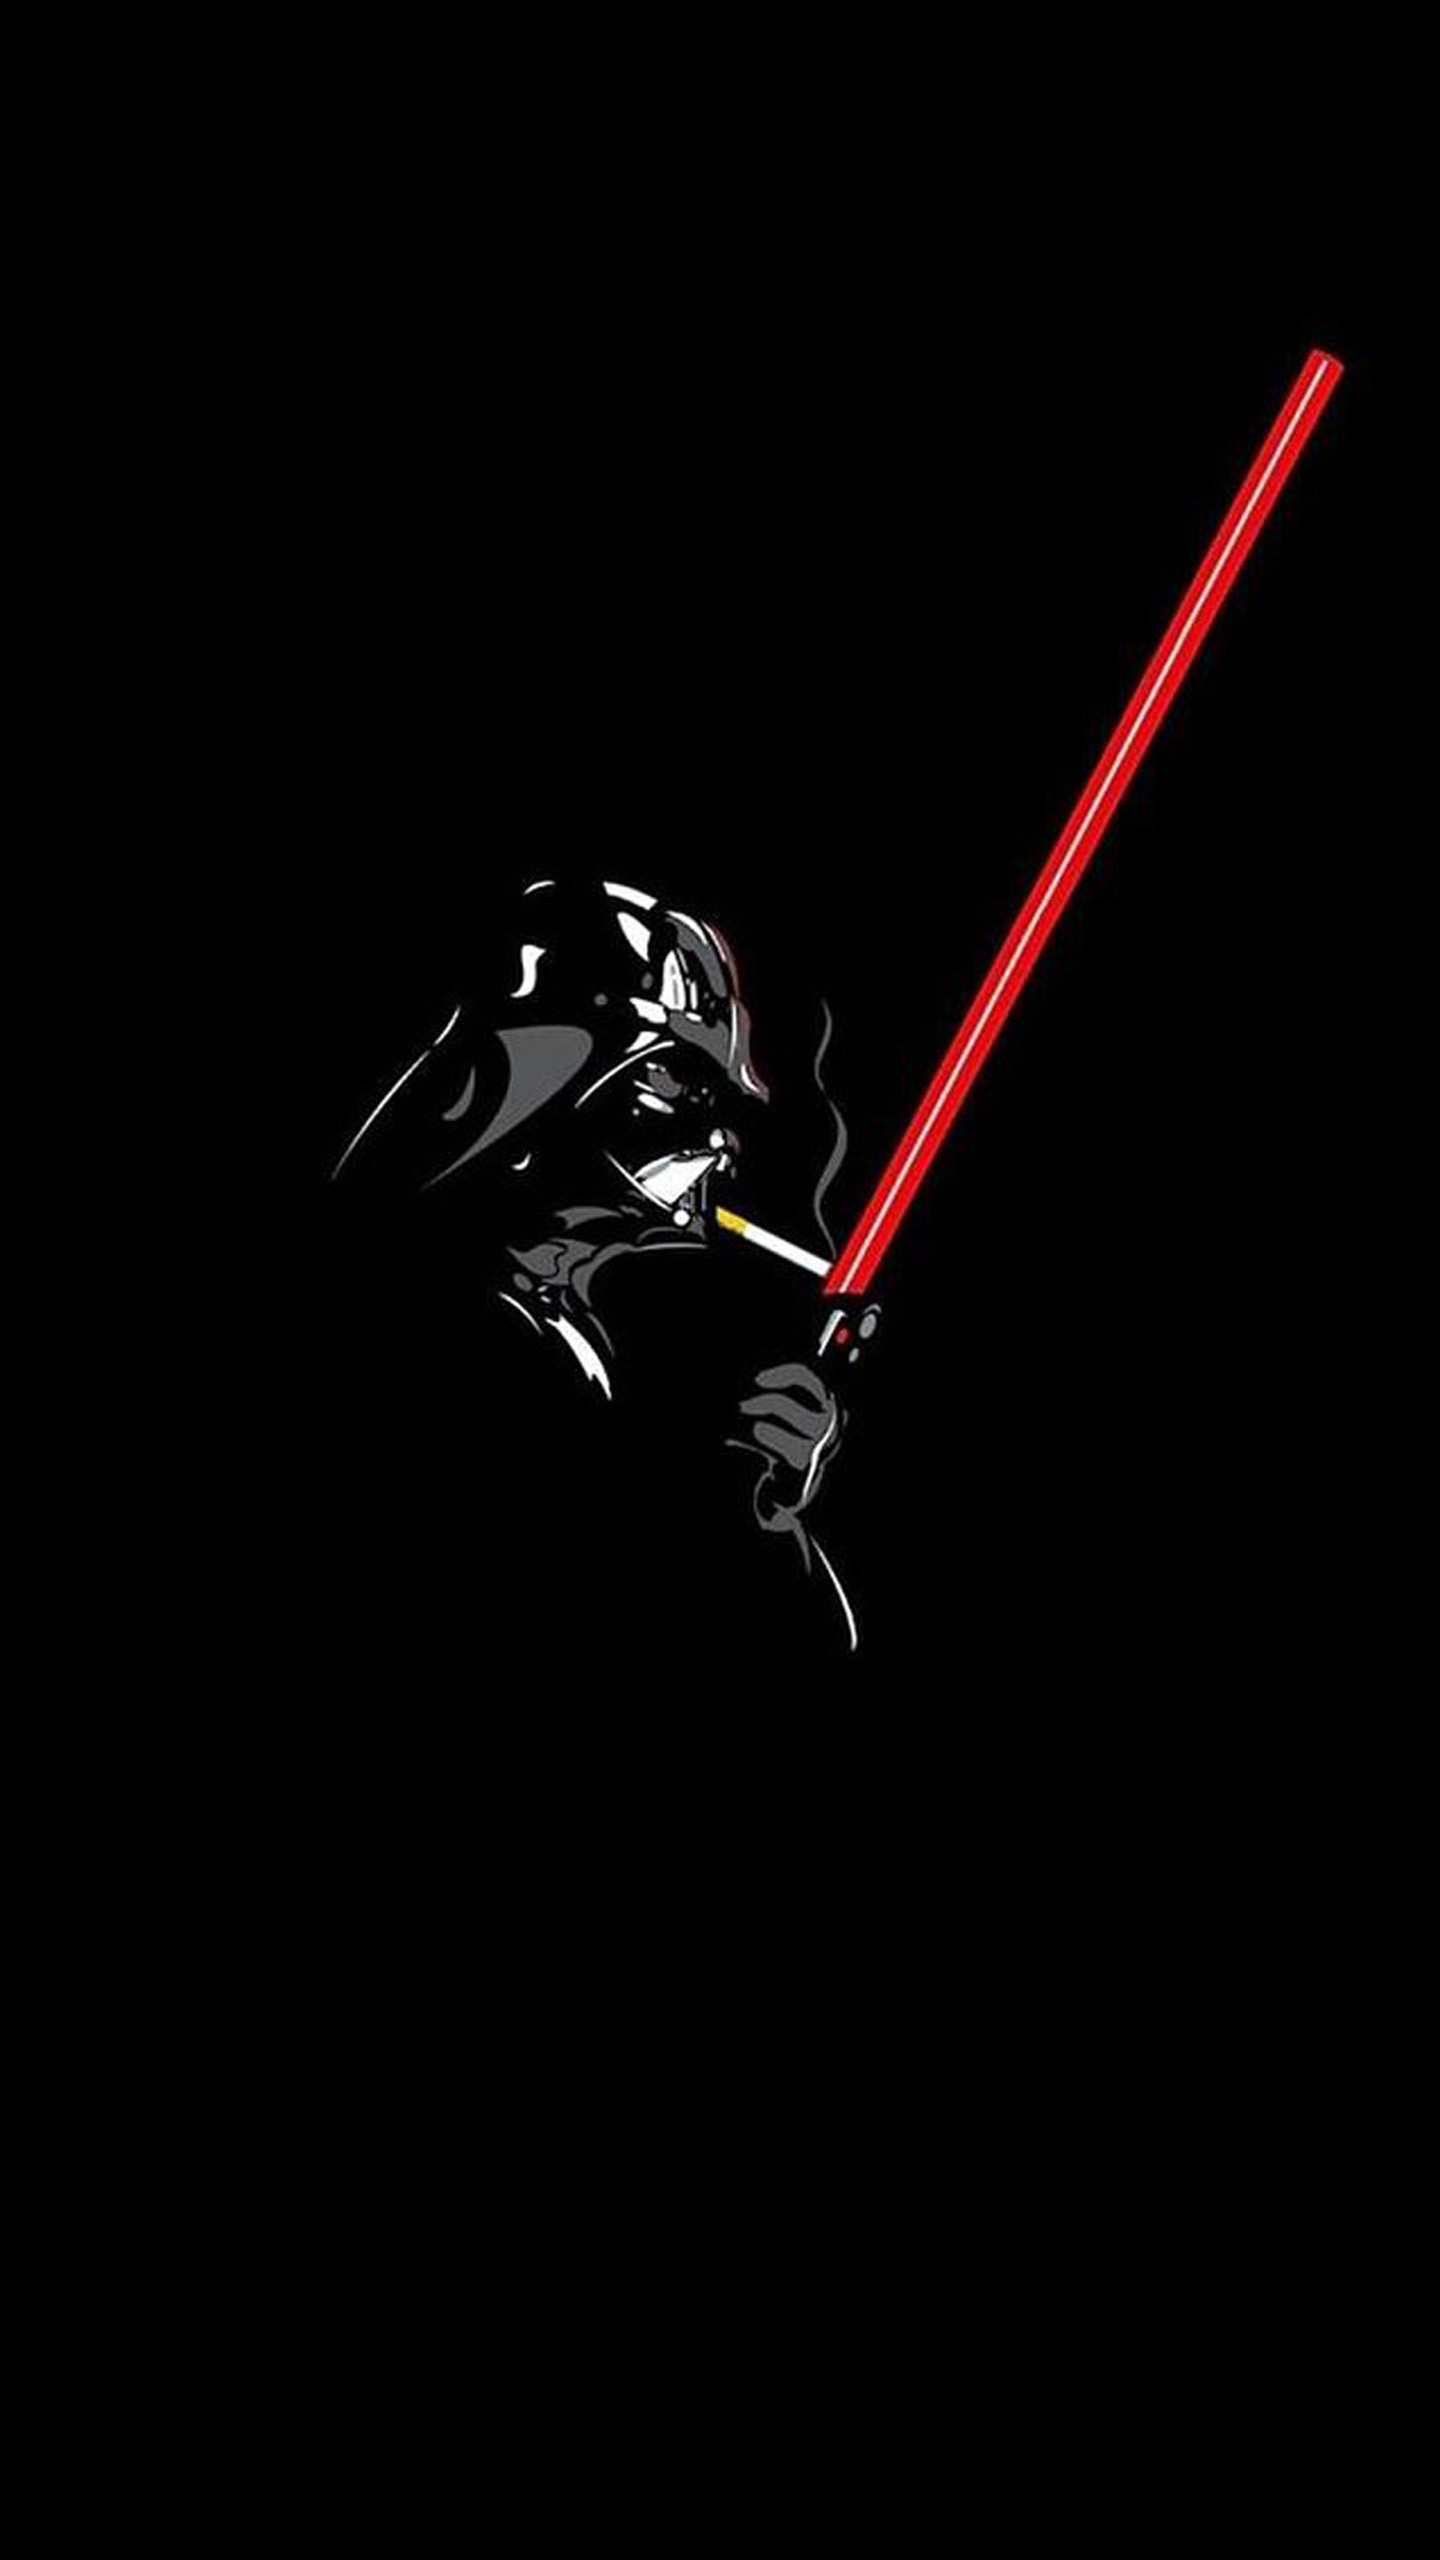 wallpapers for android,darth vader,black,light,graphic design,darkness